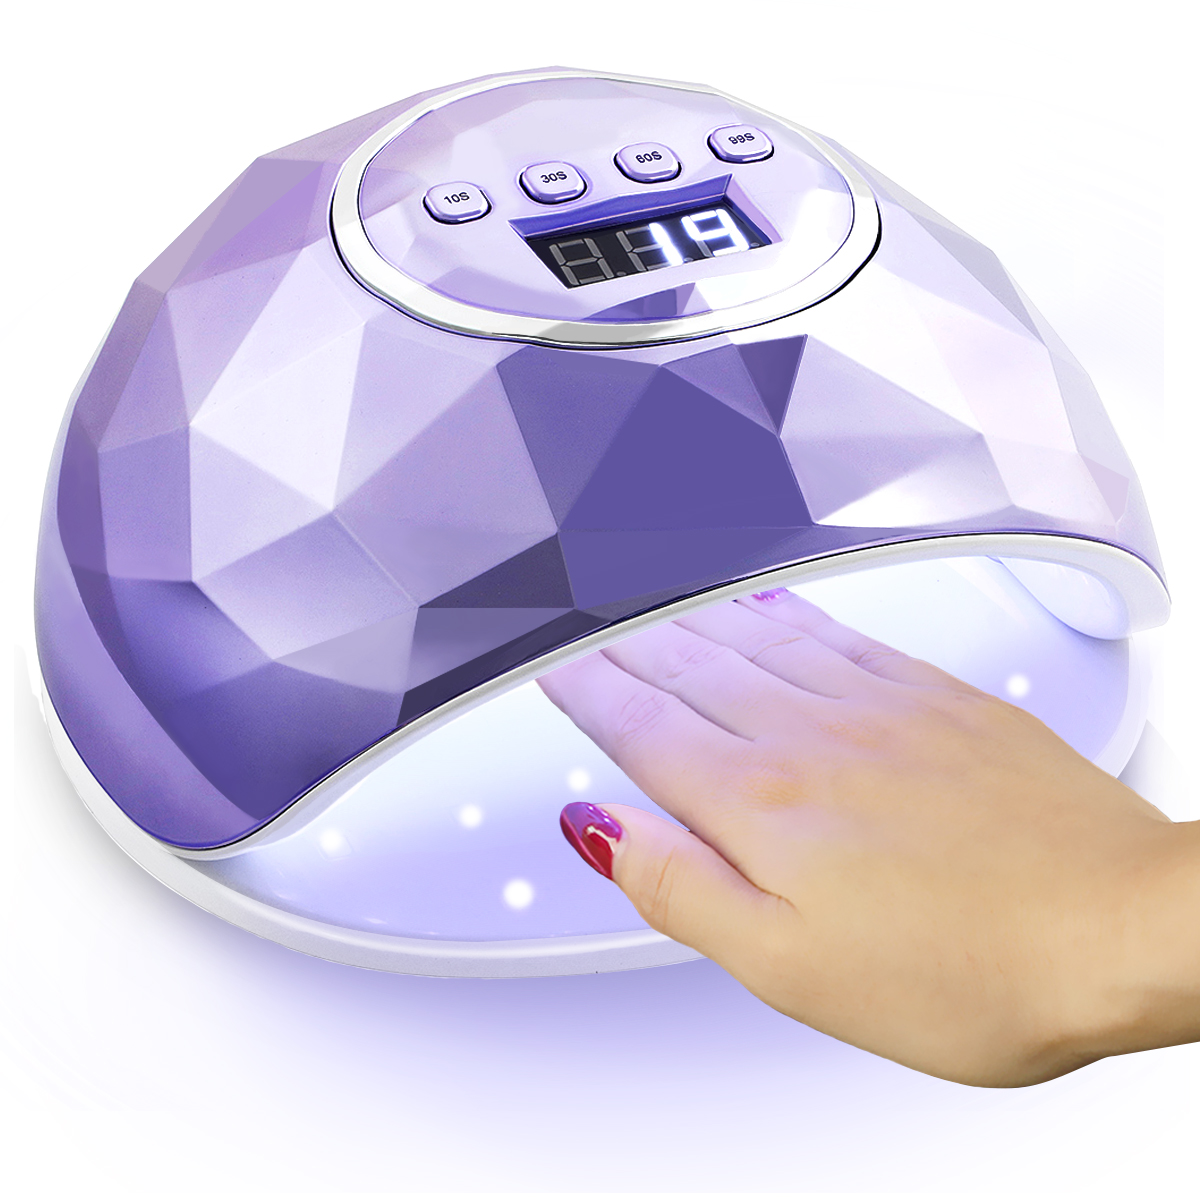 86W-UV-LED-Nail-Lamp-Automatic-Curing-Nail-Dryer-LCD-Display-Manicure-Pedicure-Tools-1844147-7